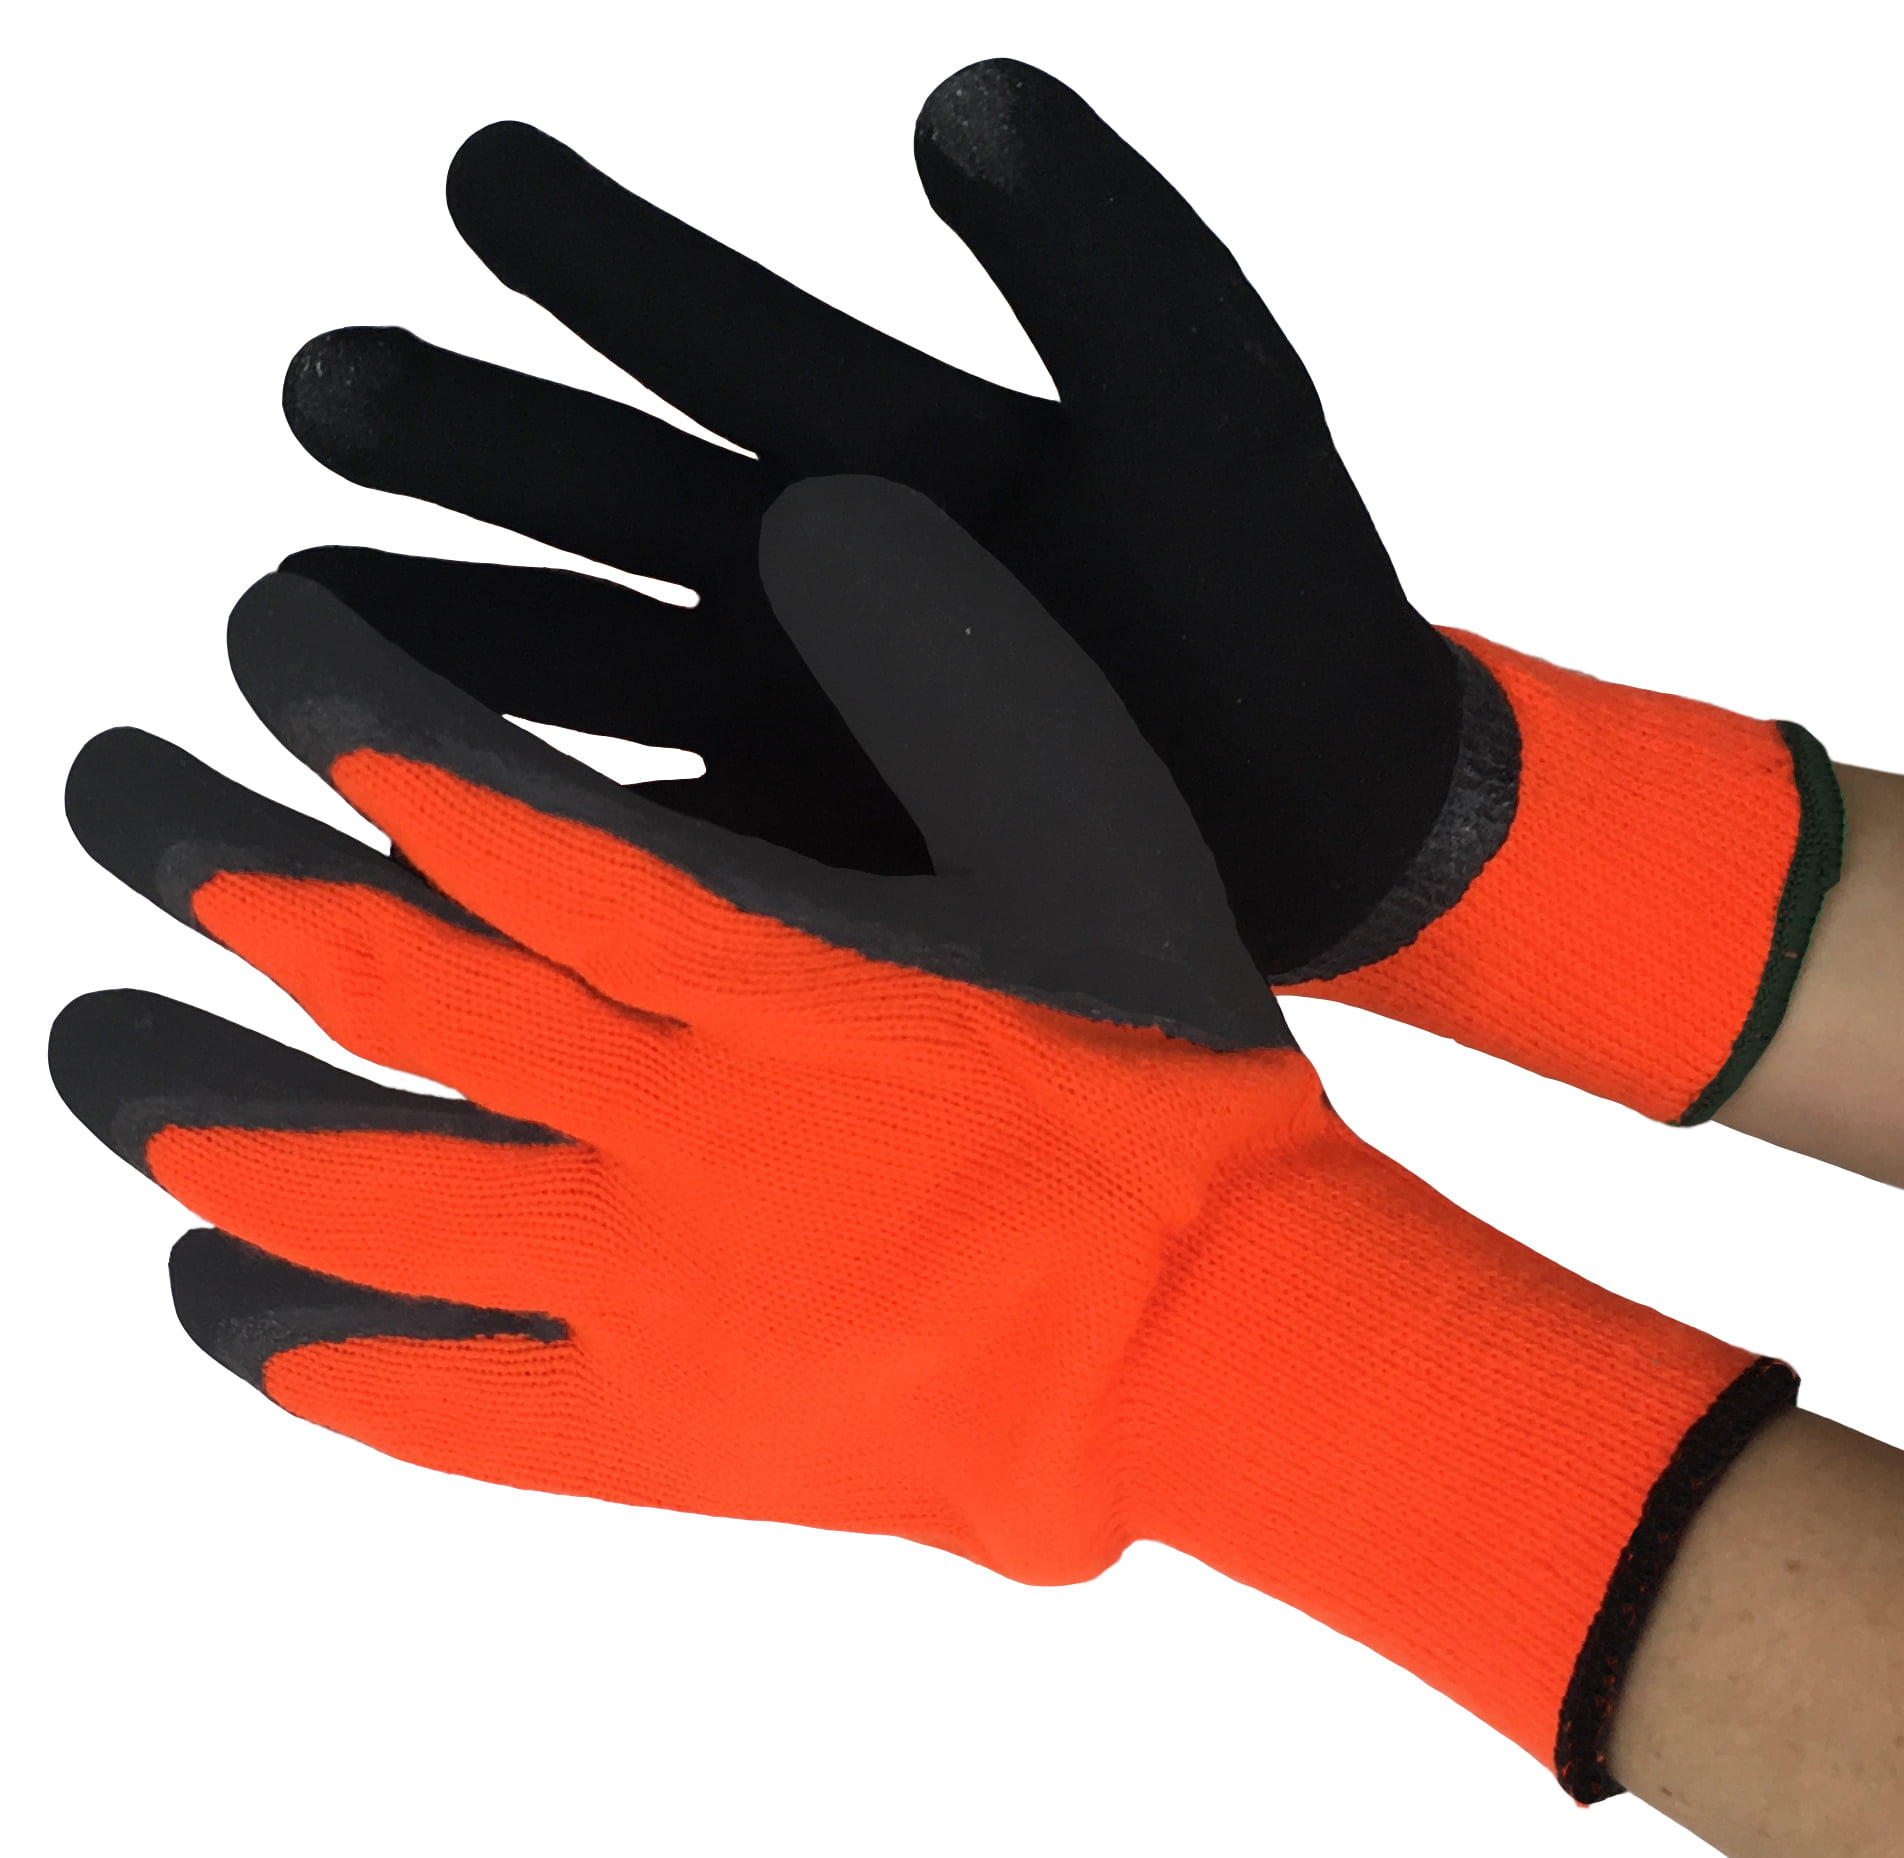 Details about   Safety Nitrile Polyester Gloves Palm Coated Rubber Protective Waterproof Gloves 